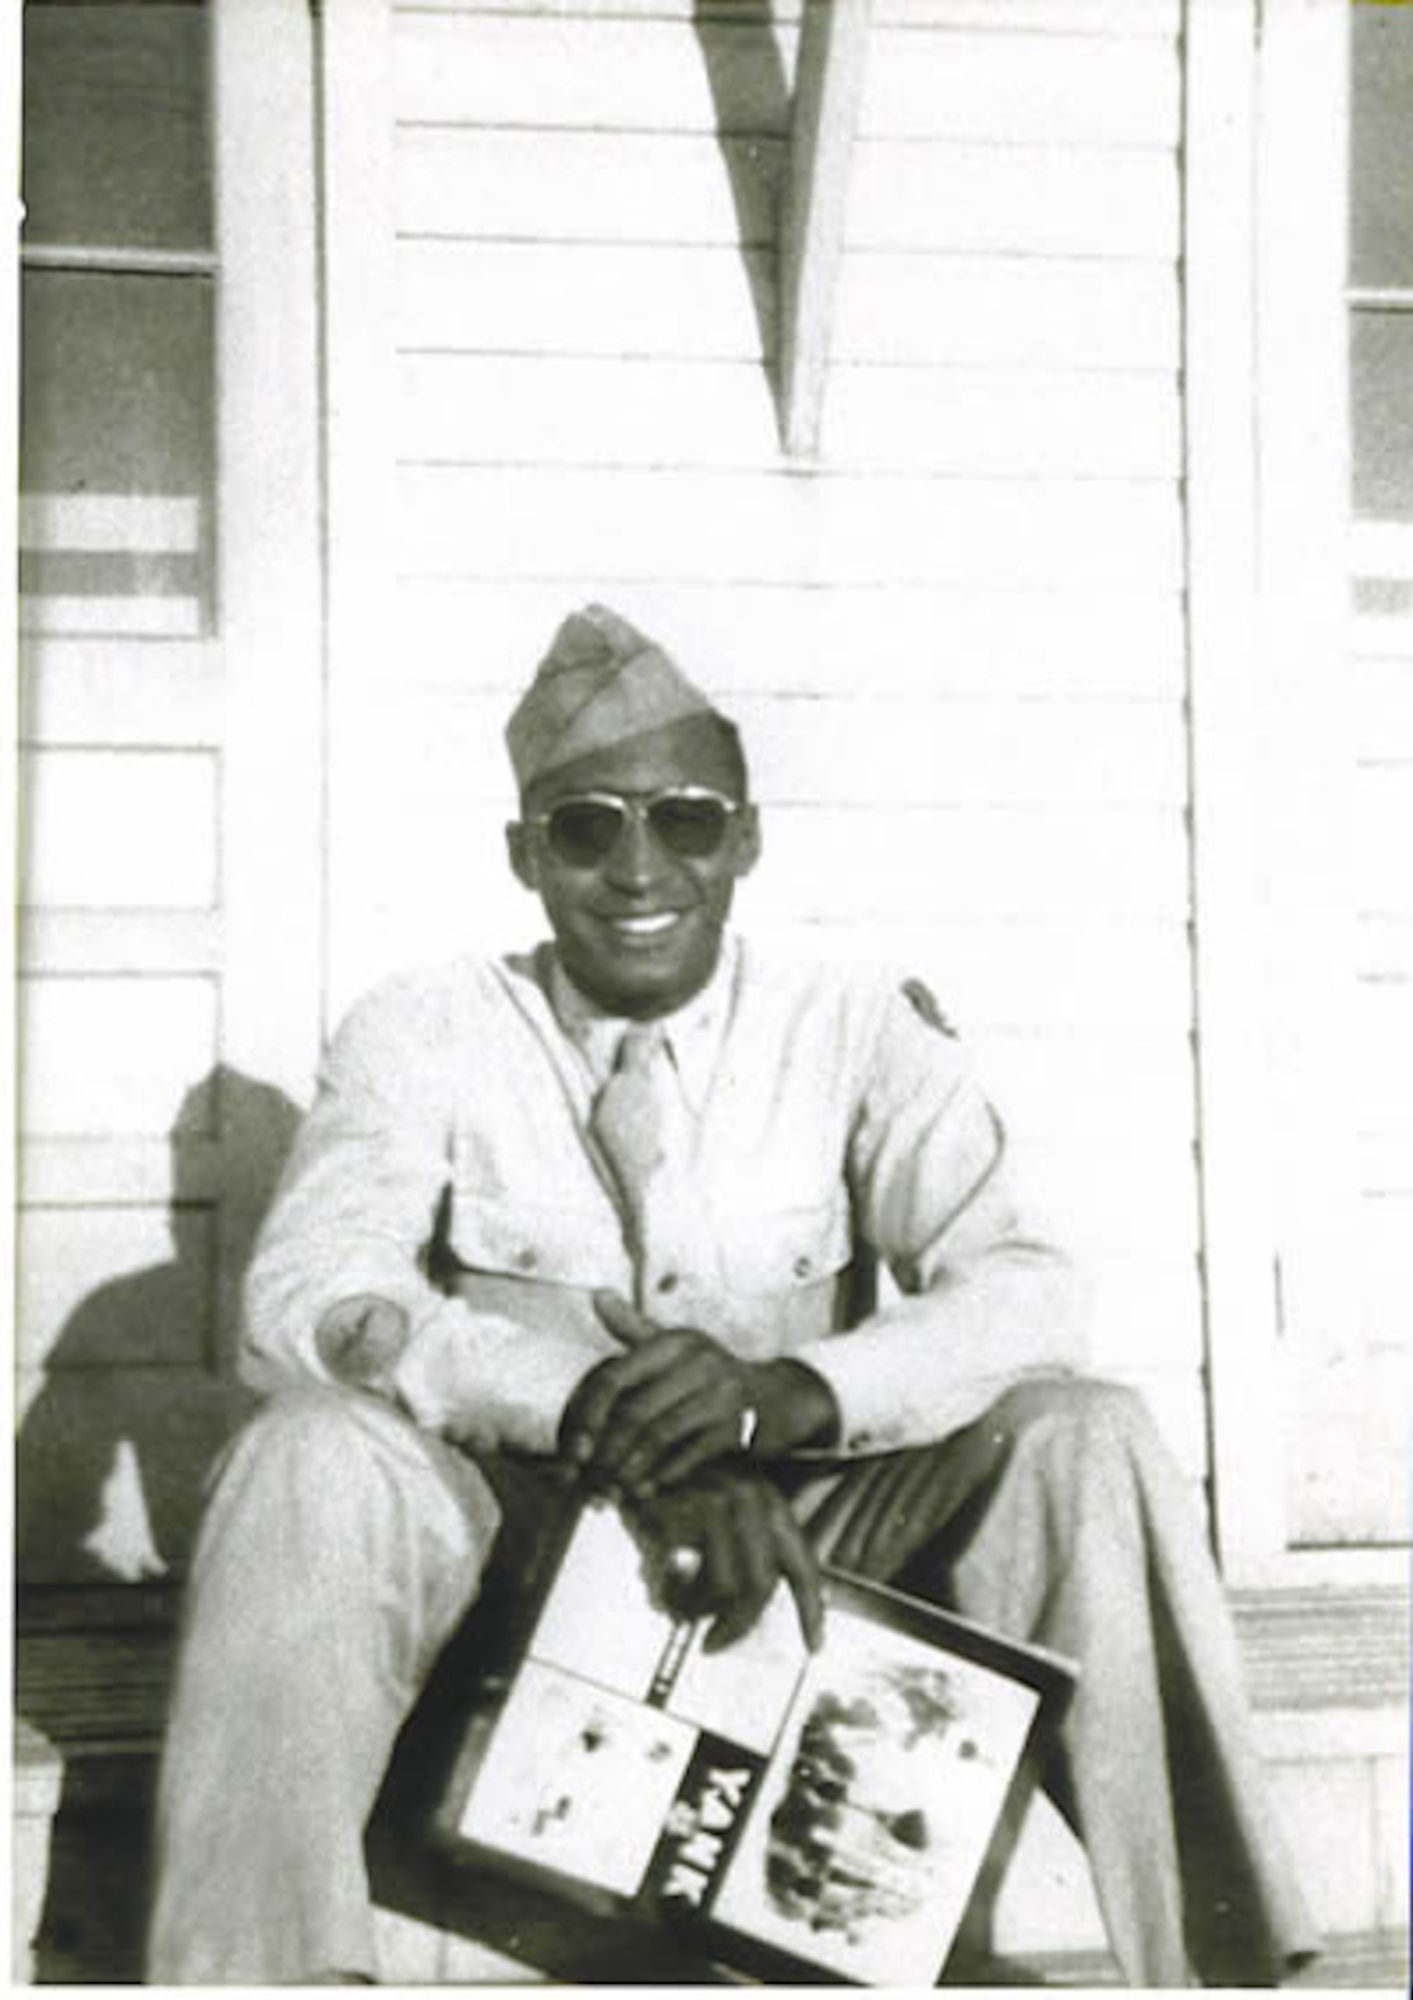 Lt. Oliver Goodall, a Tuskegee Airman, was refused entry to all white officer's club